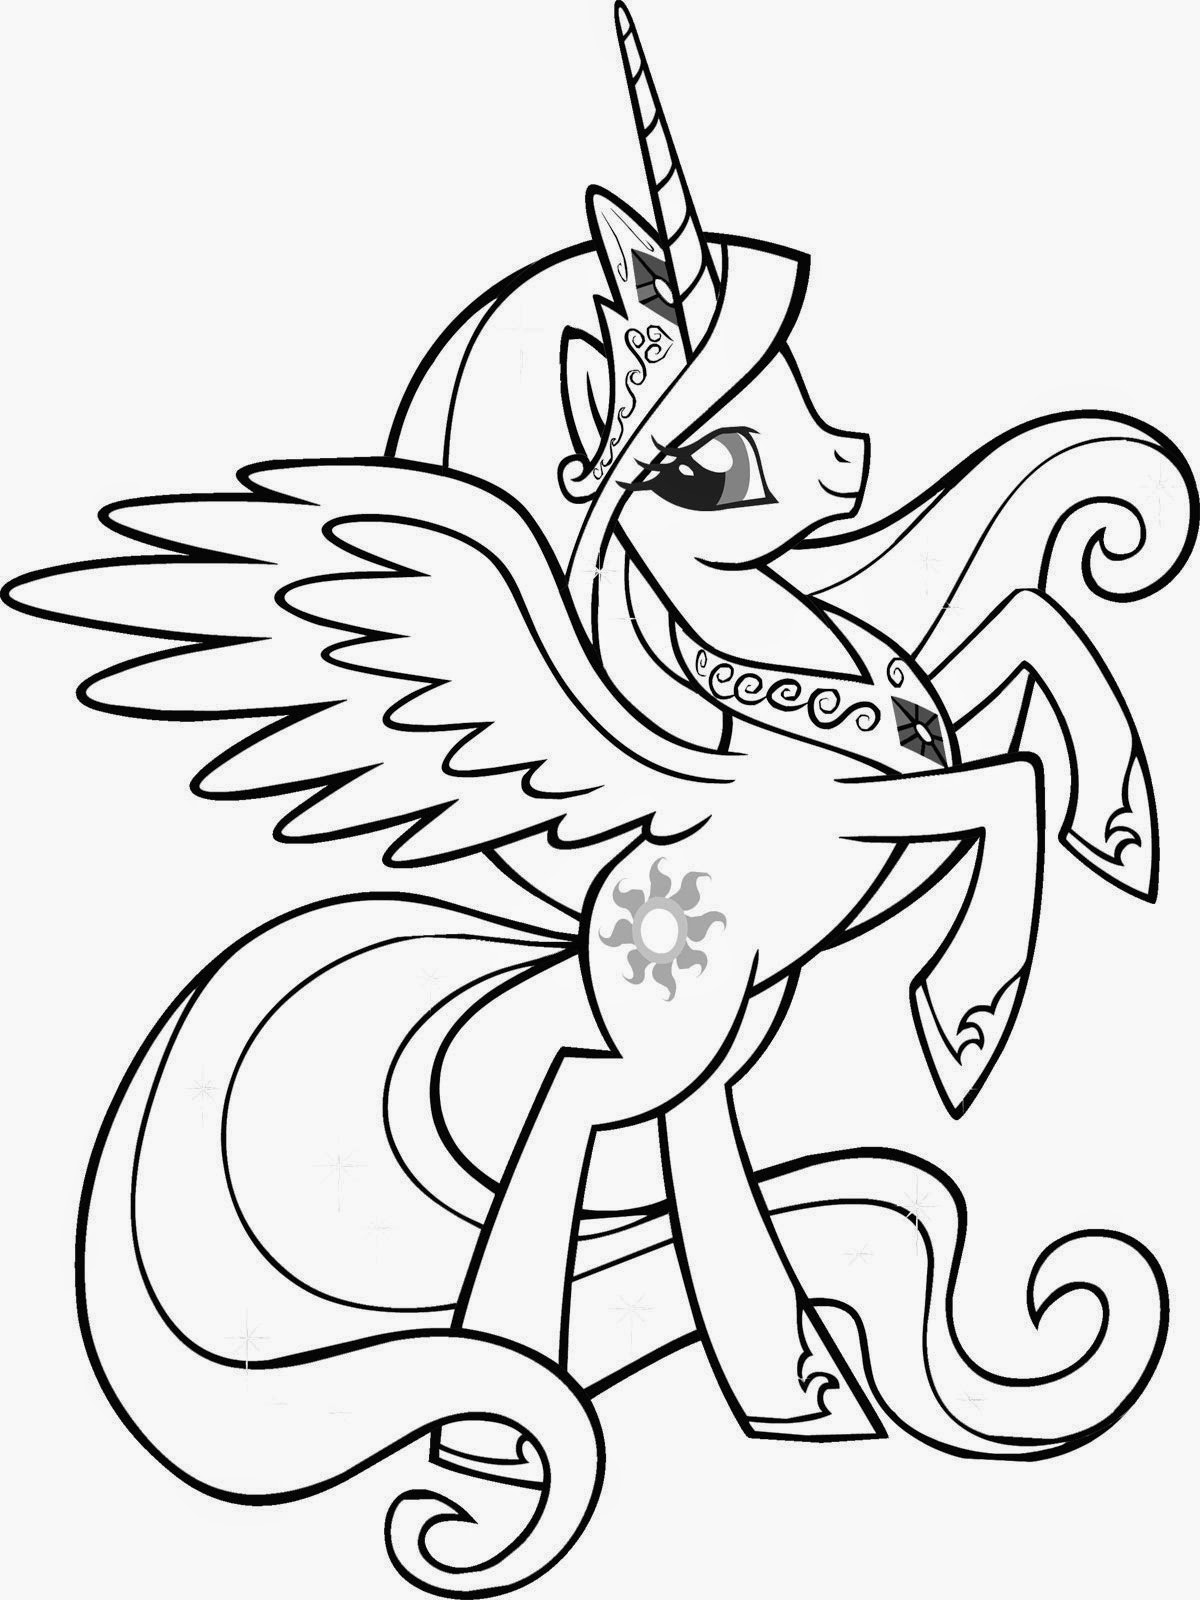 Alicorn Coloring Pages at GetDrawings | Free download